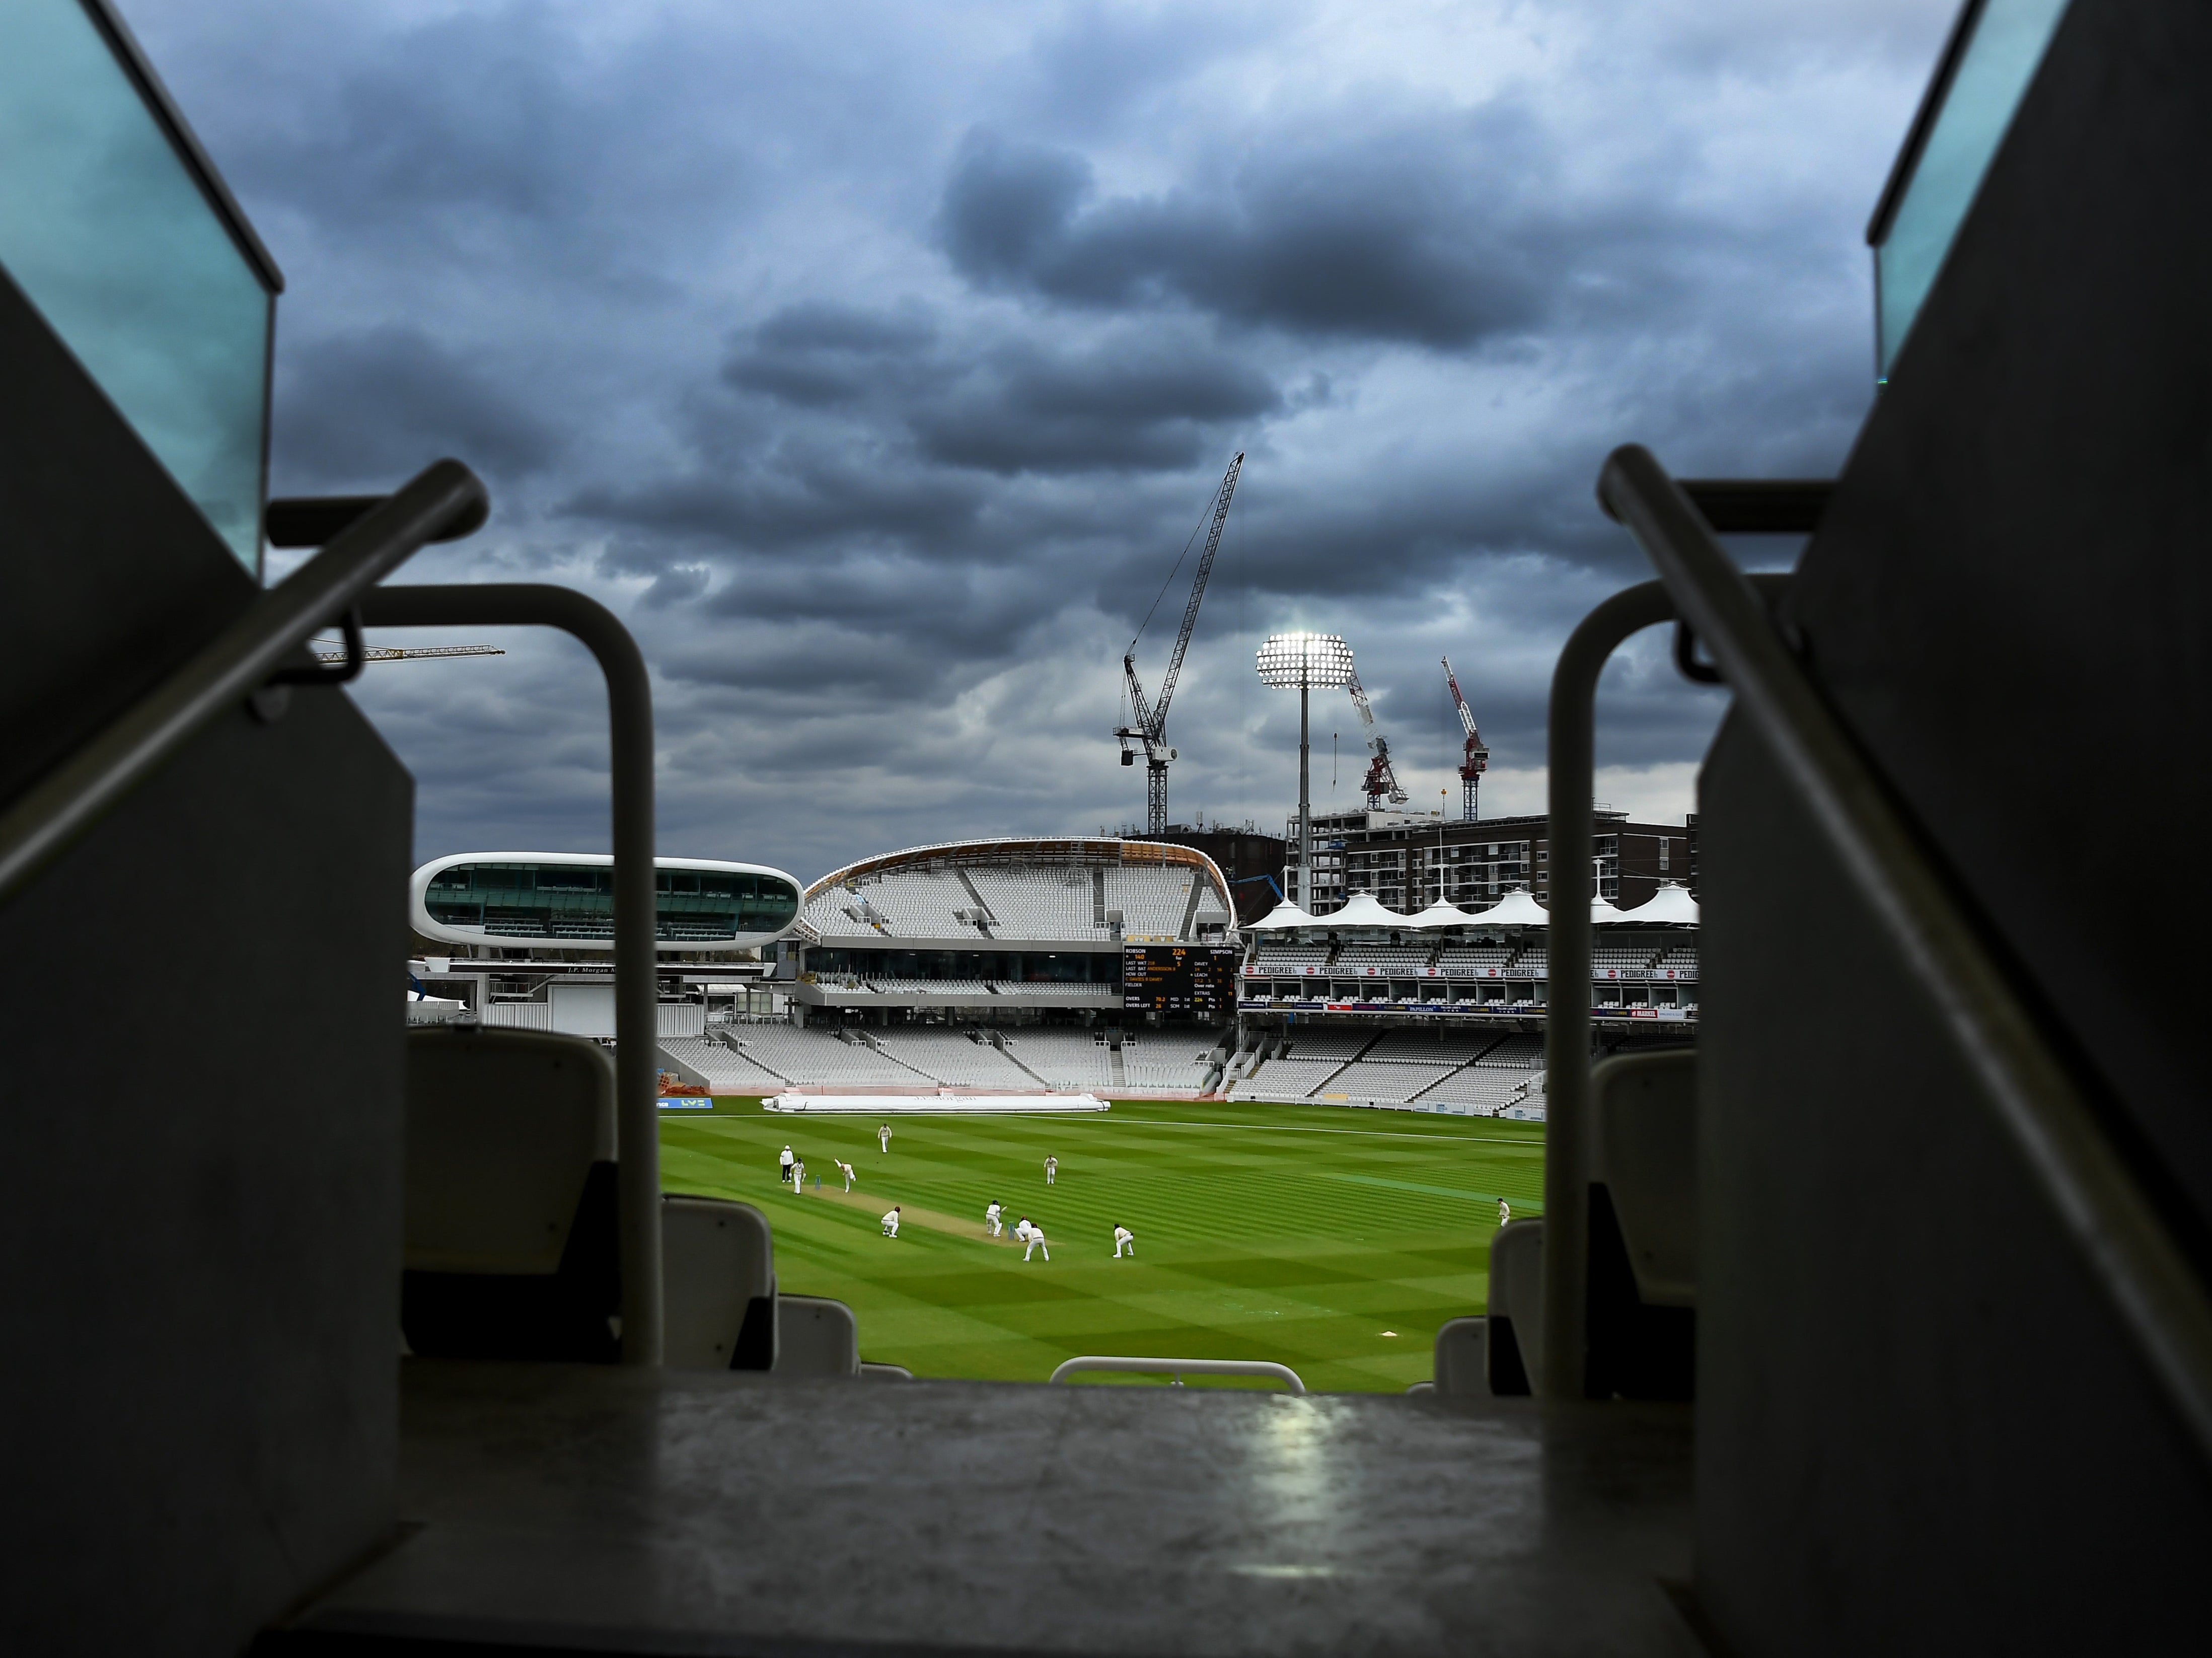 A general view of play during Middlesex vs Somerset at Lord’s